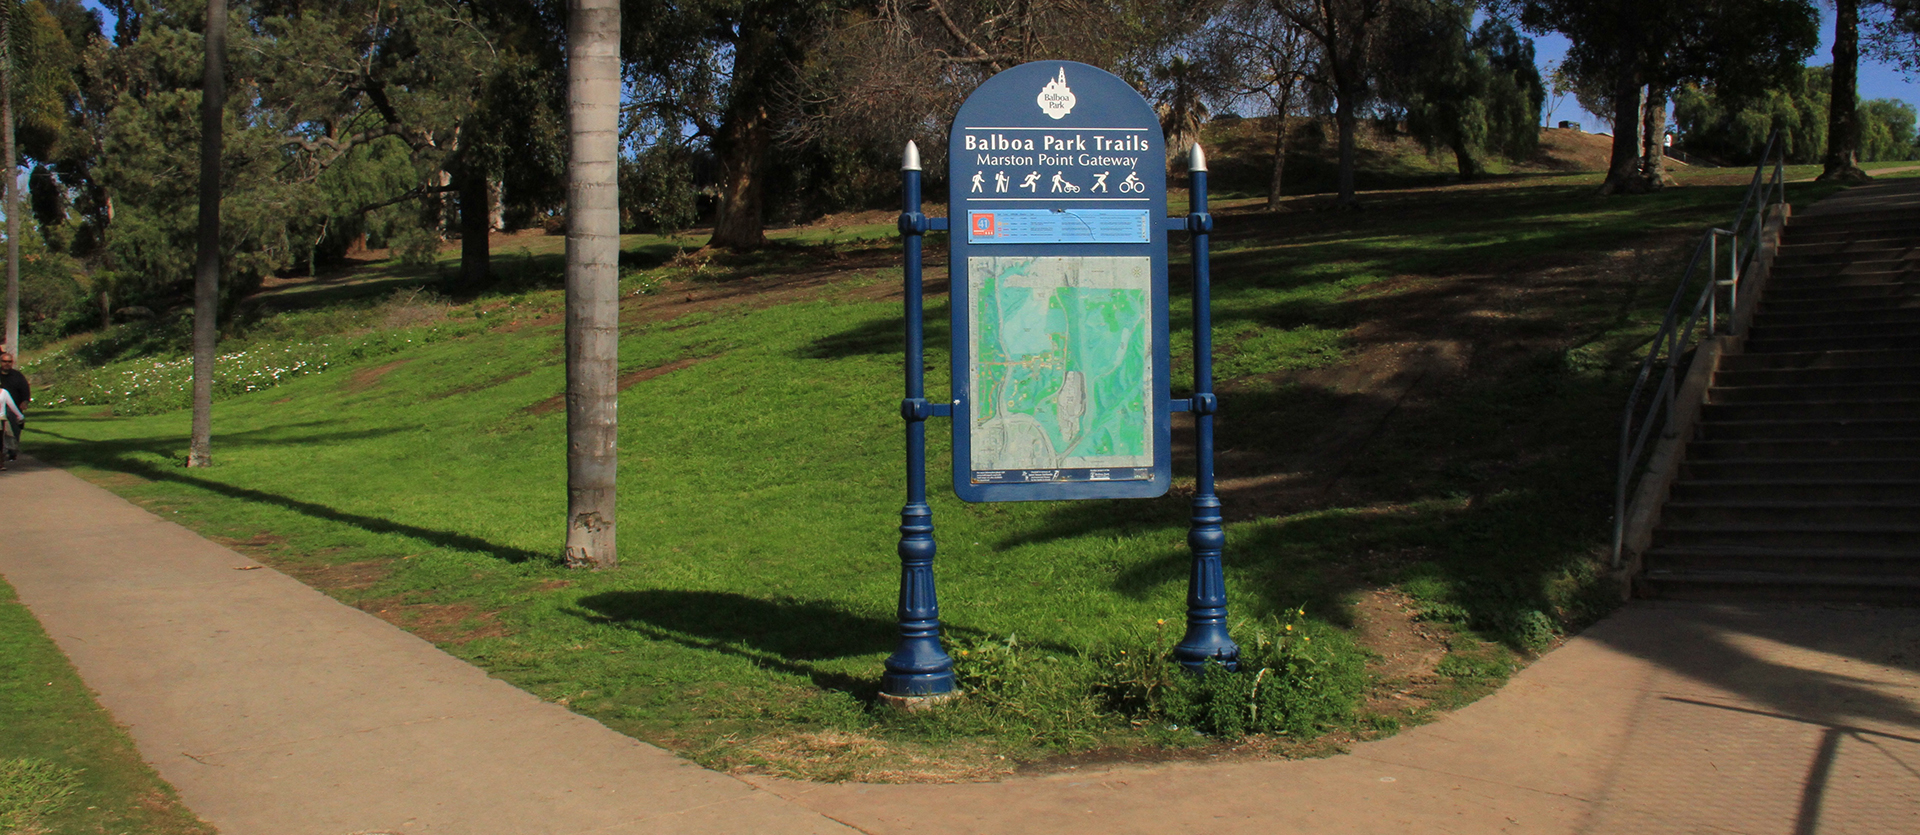 Balboa Park Trails sign for Marston Point Gateway with a trail map and legend. A side walk is located on the left hand side of the sign and stairs are located on the right hand side of the sign. A hill with trees and blue sky are in the background.